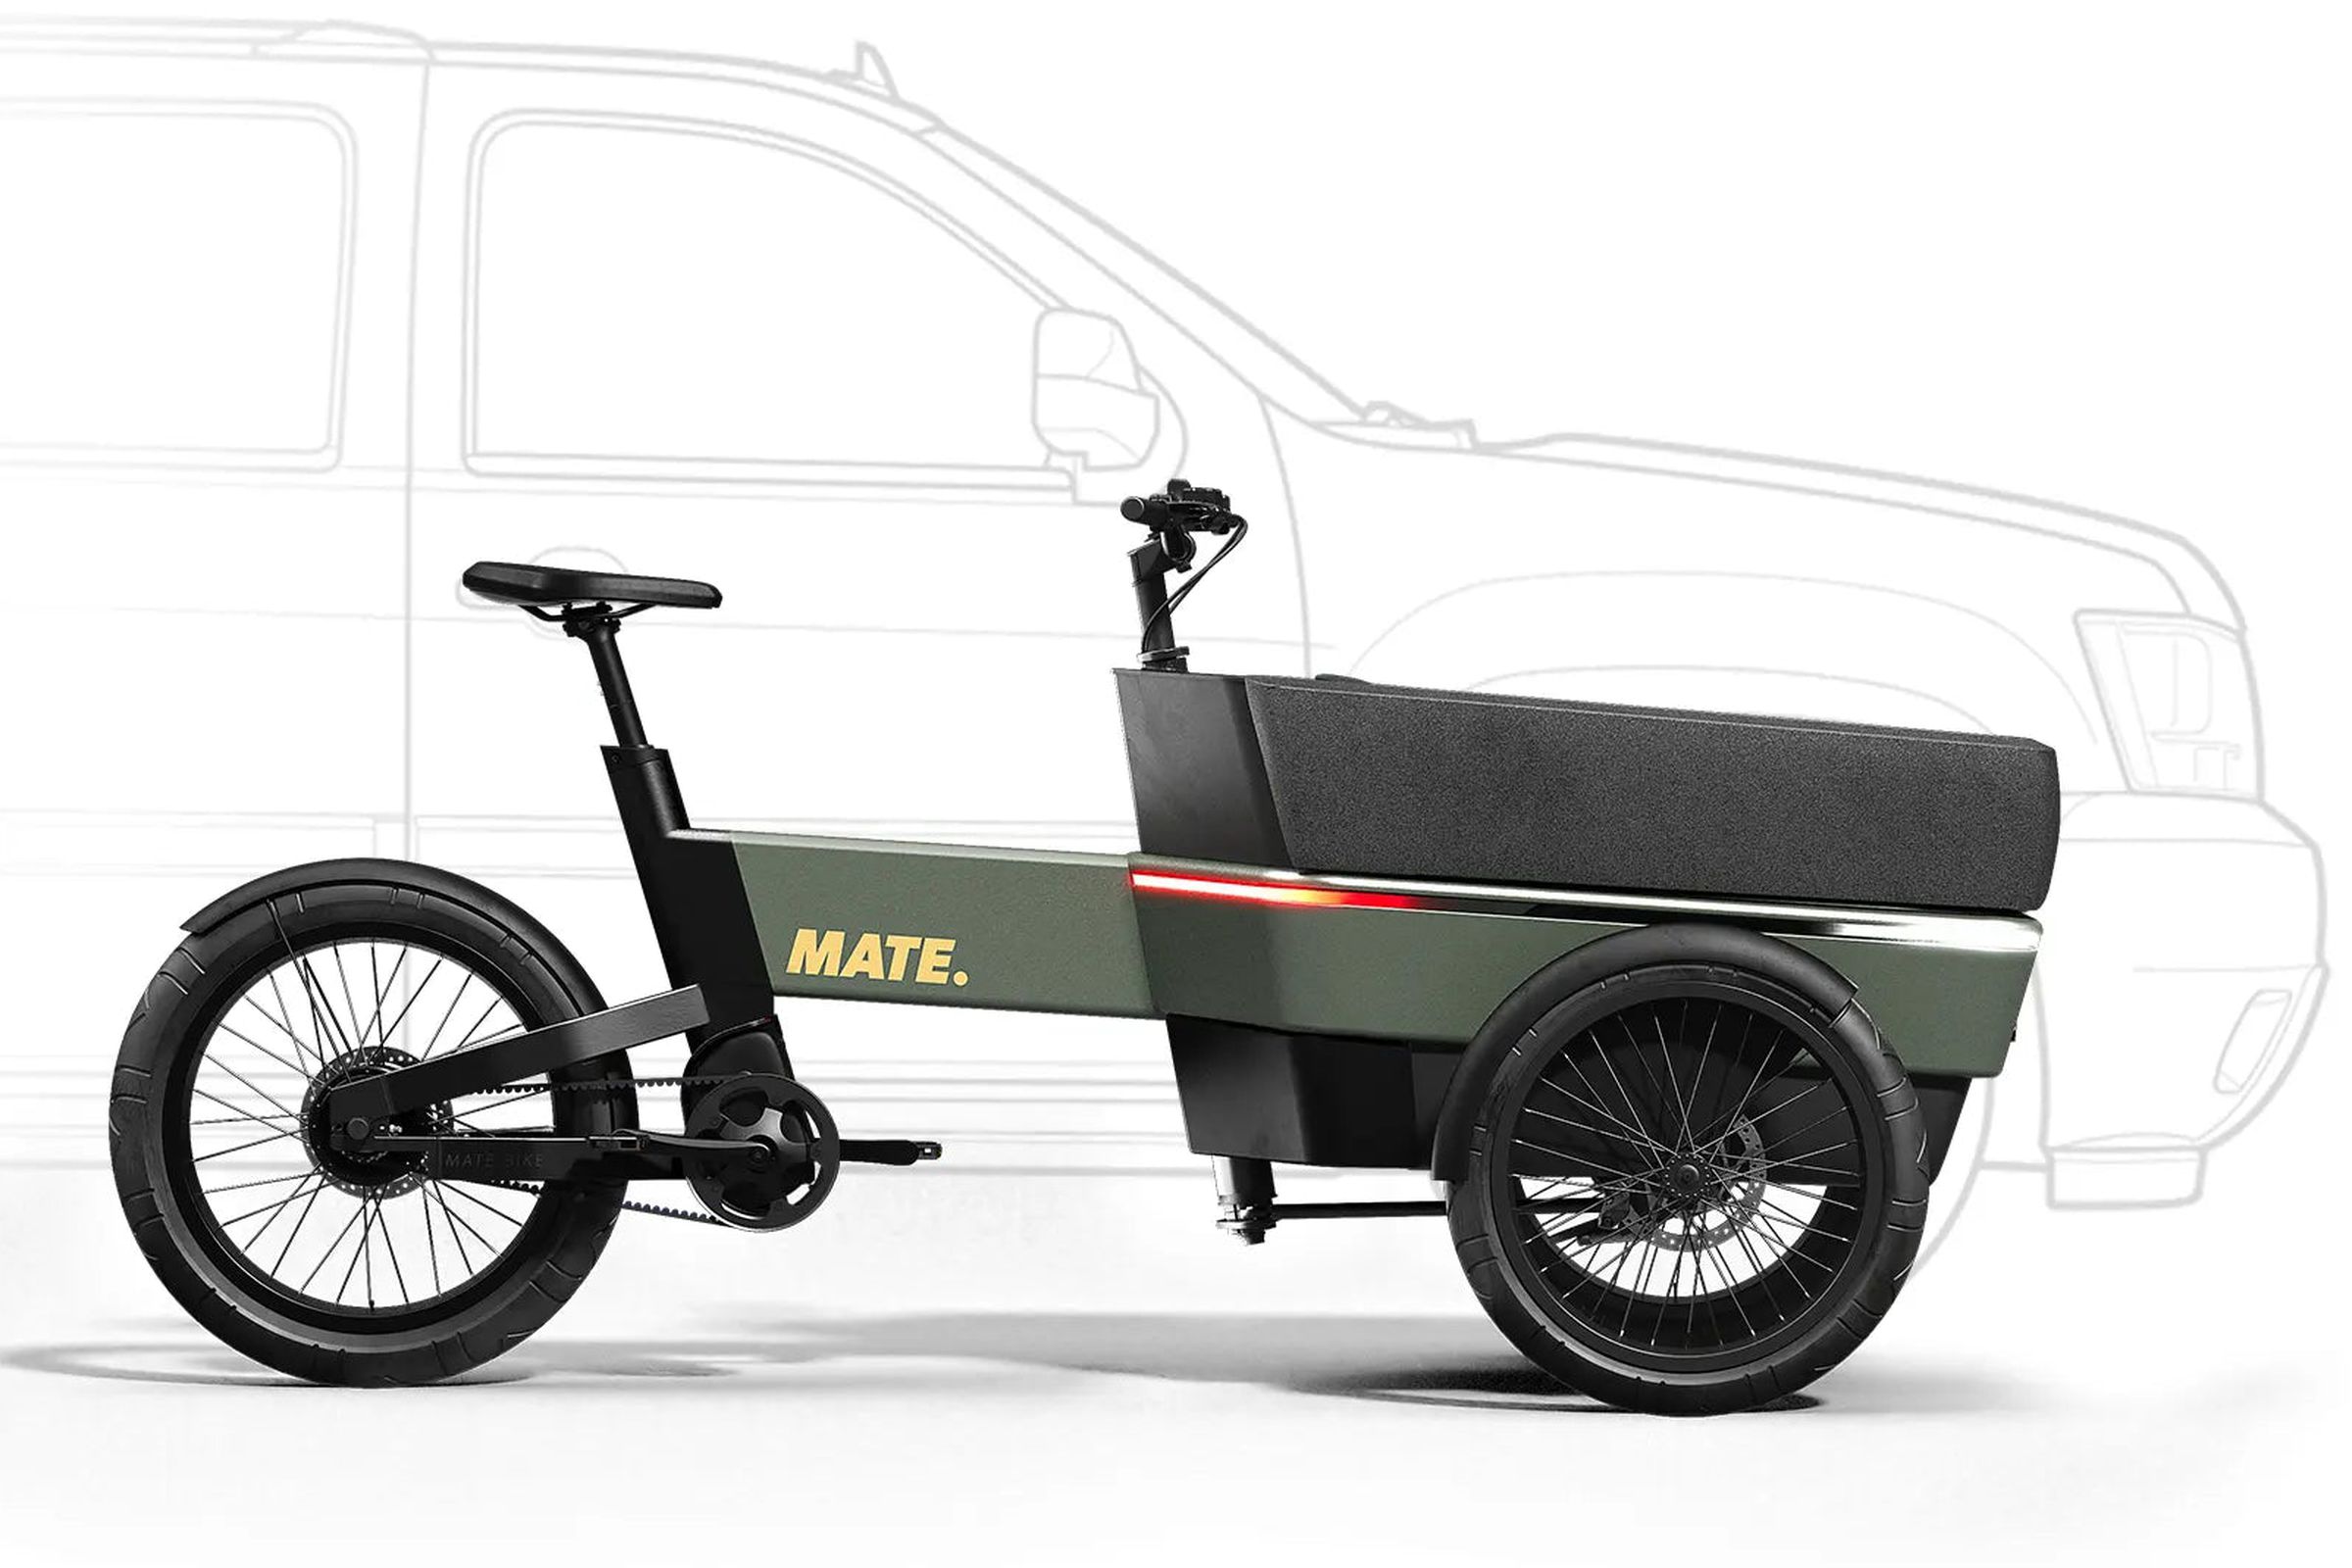 The Mate SUV, like all cargo e-bikes, can replace a car for many families.